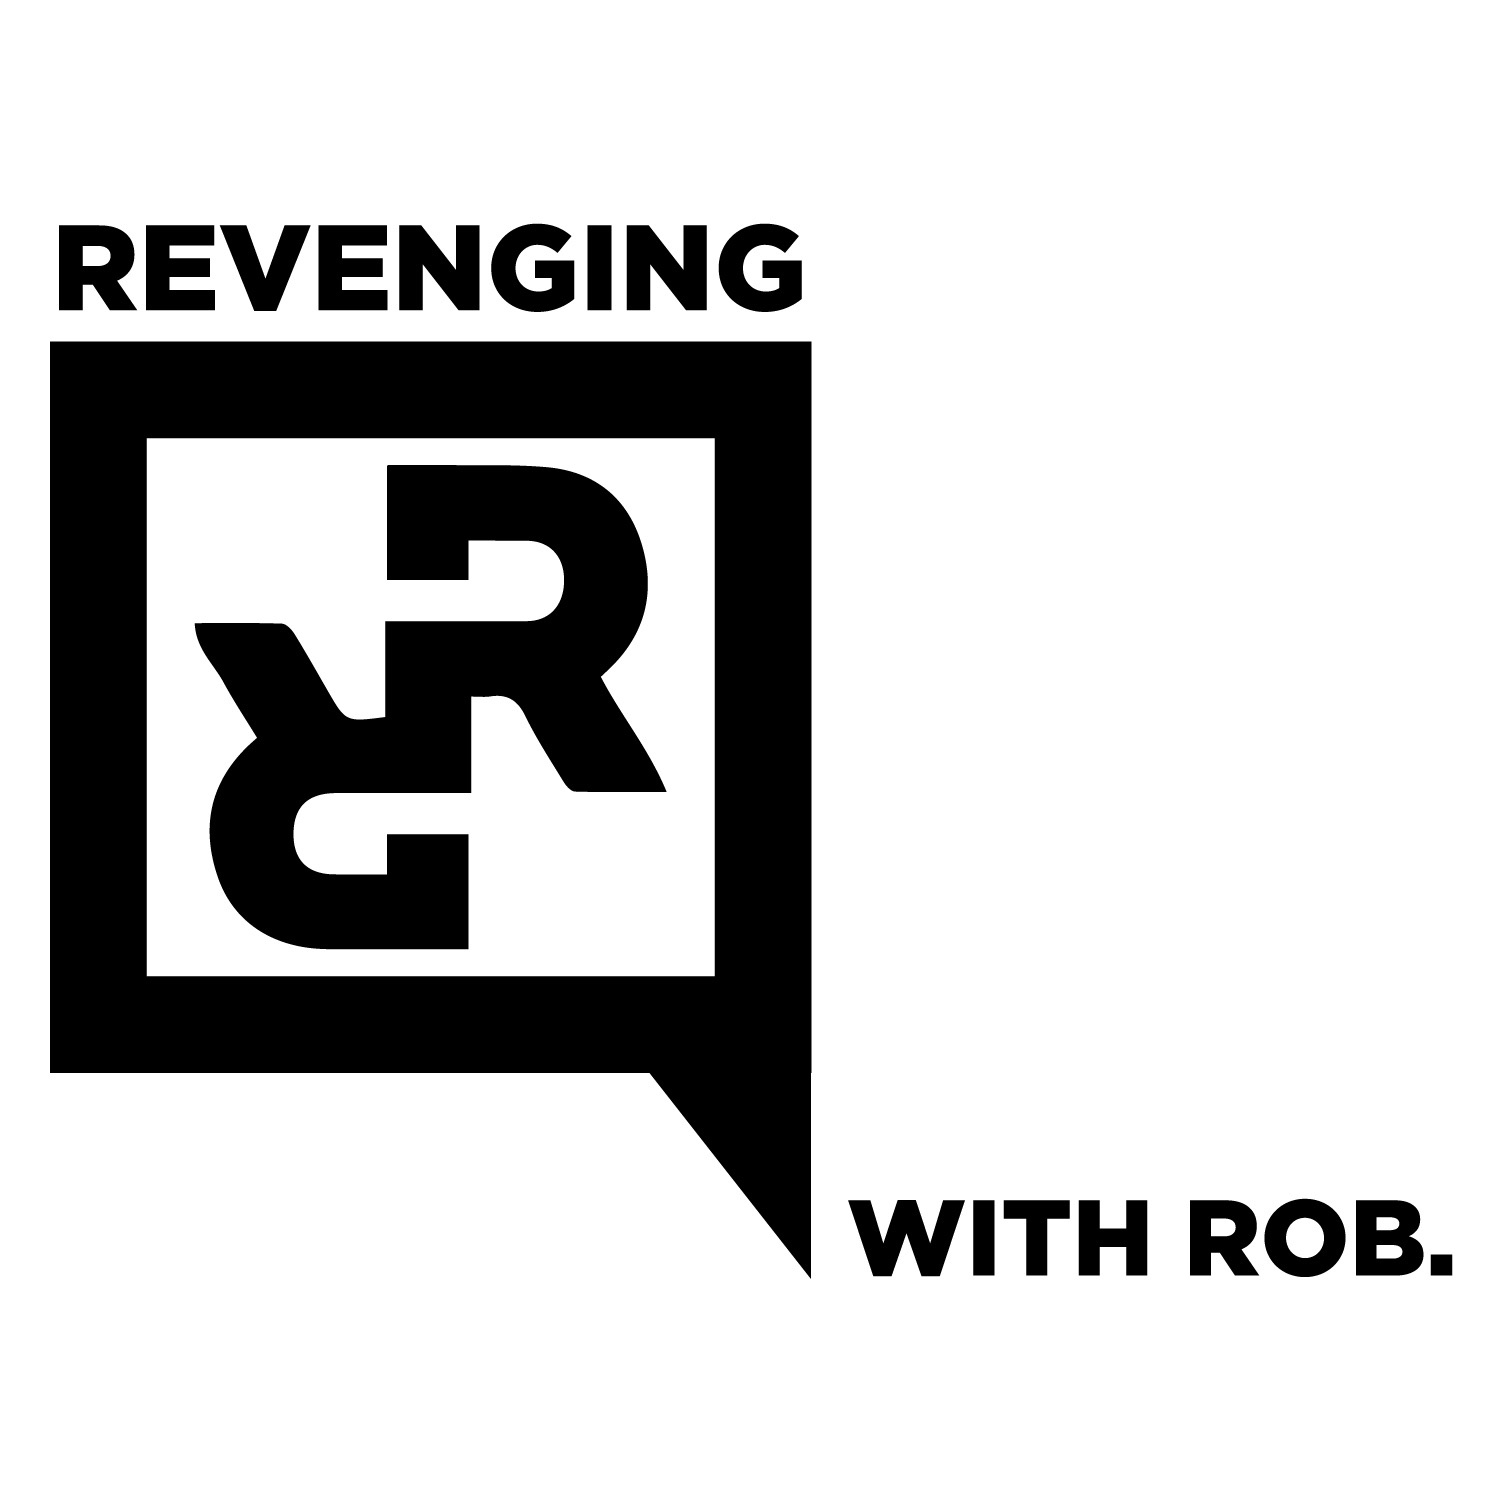 Revenging with Rob